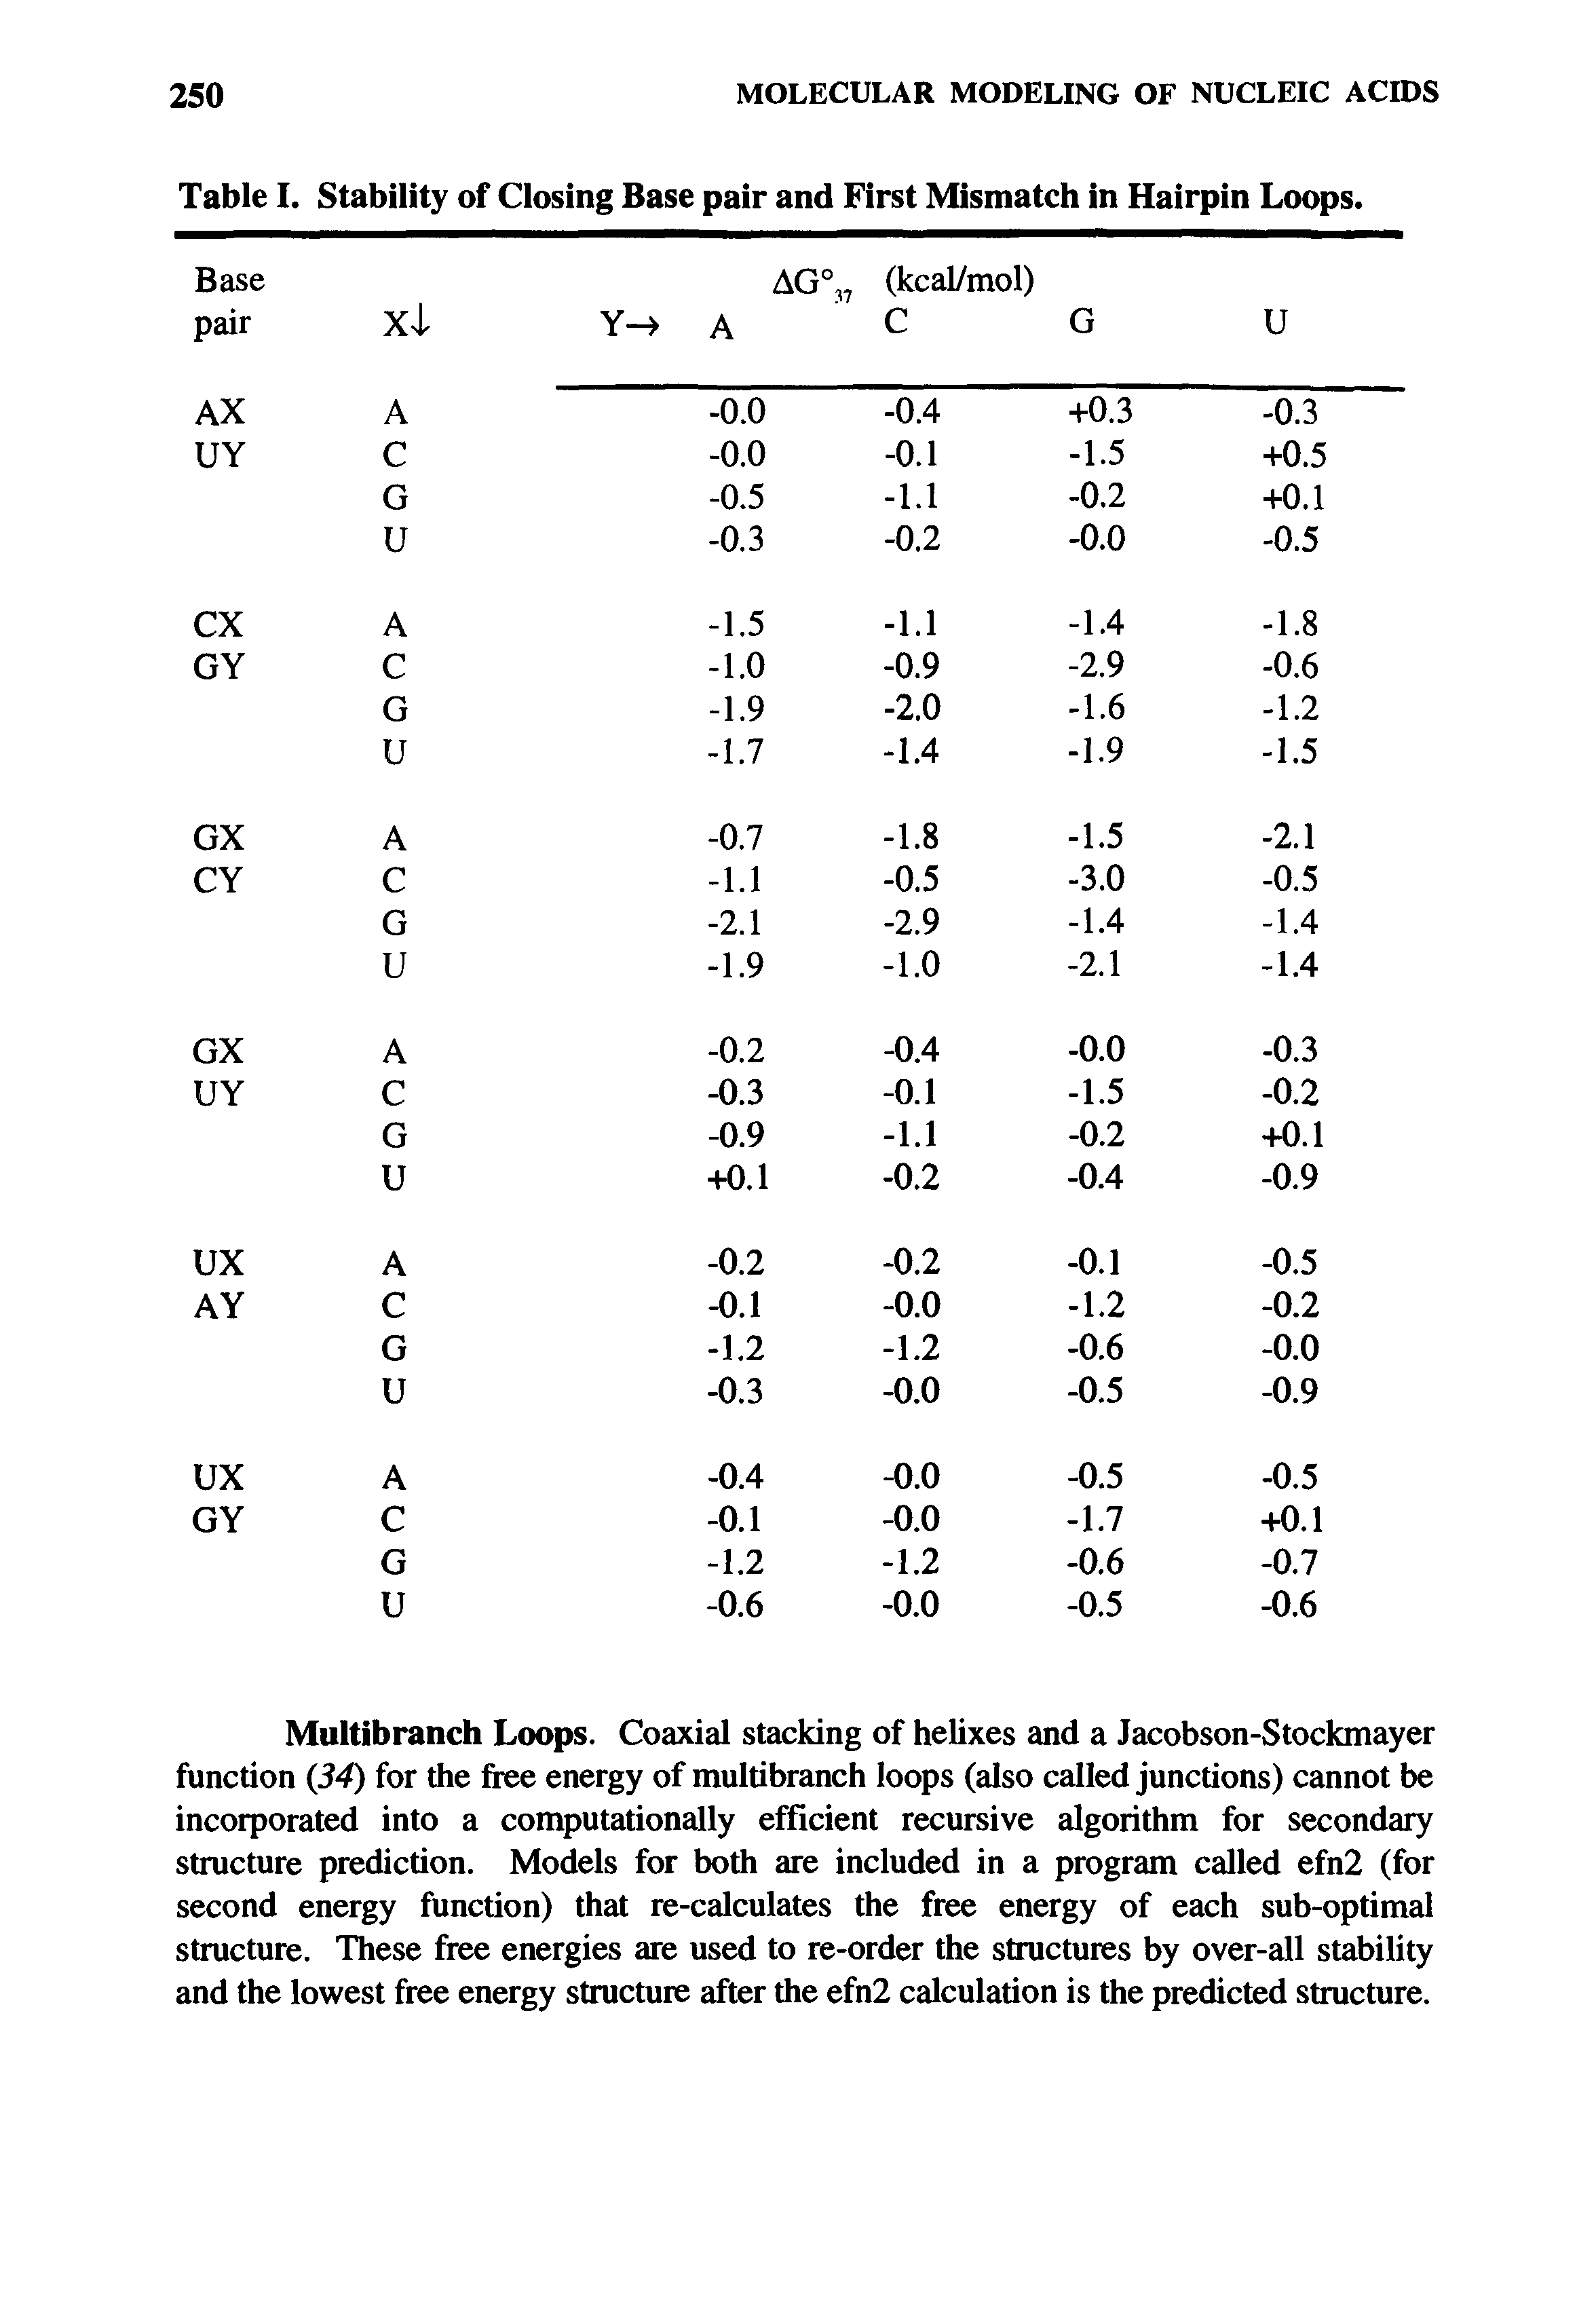 Table I. Stability of Closing Base pair and First Mismatch in Hairpin Loops.